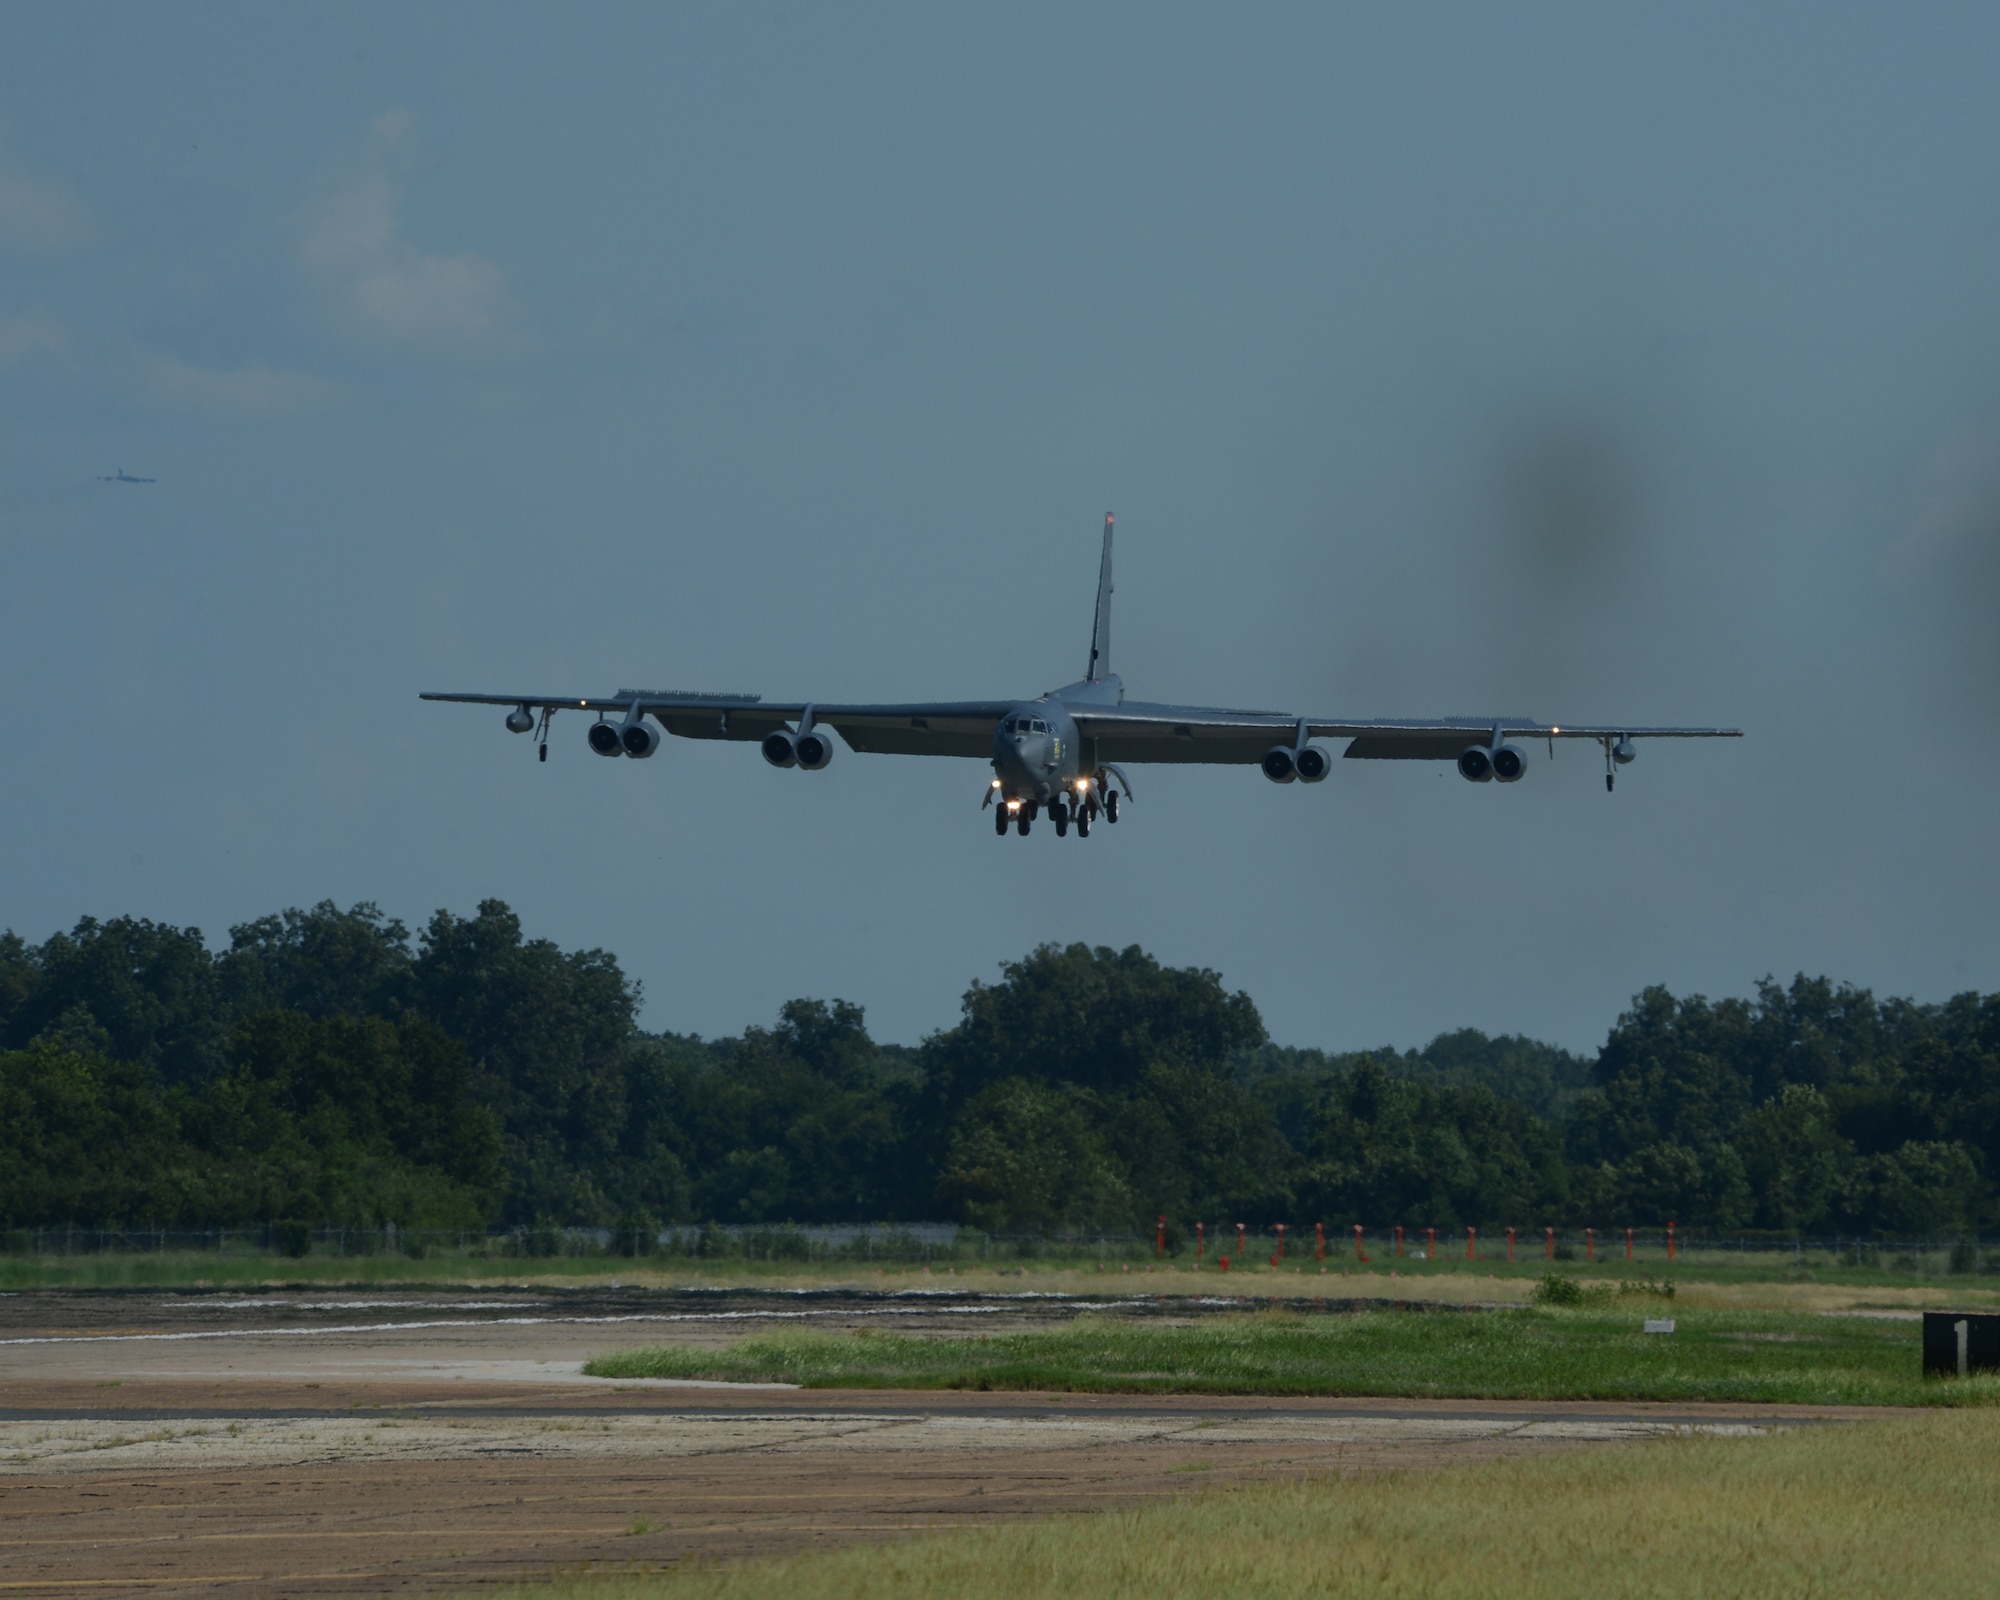 A B-52H Stratofortress returns home to Barksdale Air Force Base, Louisiana, Aug. 12, 2014 following a 15.5-hour sortie from the United States to the U.S. Southern Command area of operations during PANAMAX 2014. An annual U.S. Southern Command-sponsored multinational exercise, PANAMAX focuses on ensuring the defense of the Panama Canal. (U.S. Air Force photo/Senior Airman Benjamin Gonsier)